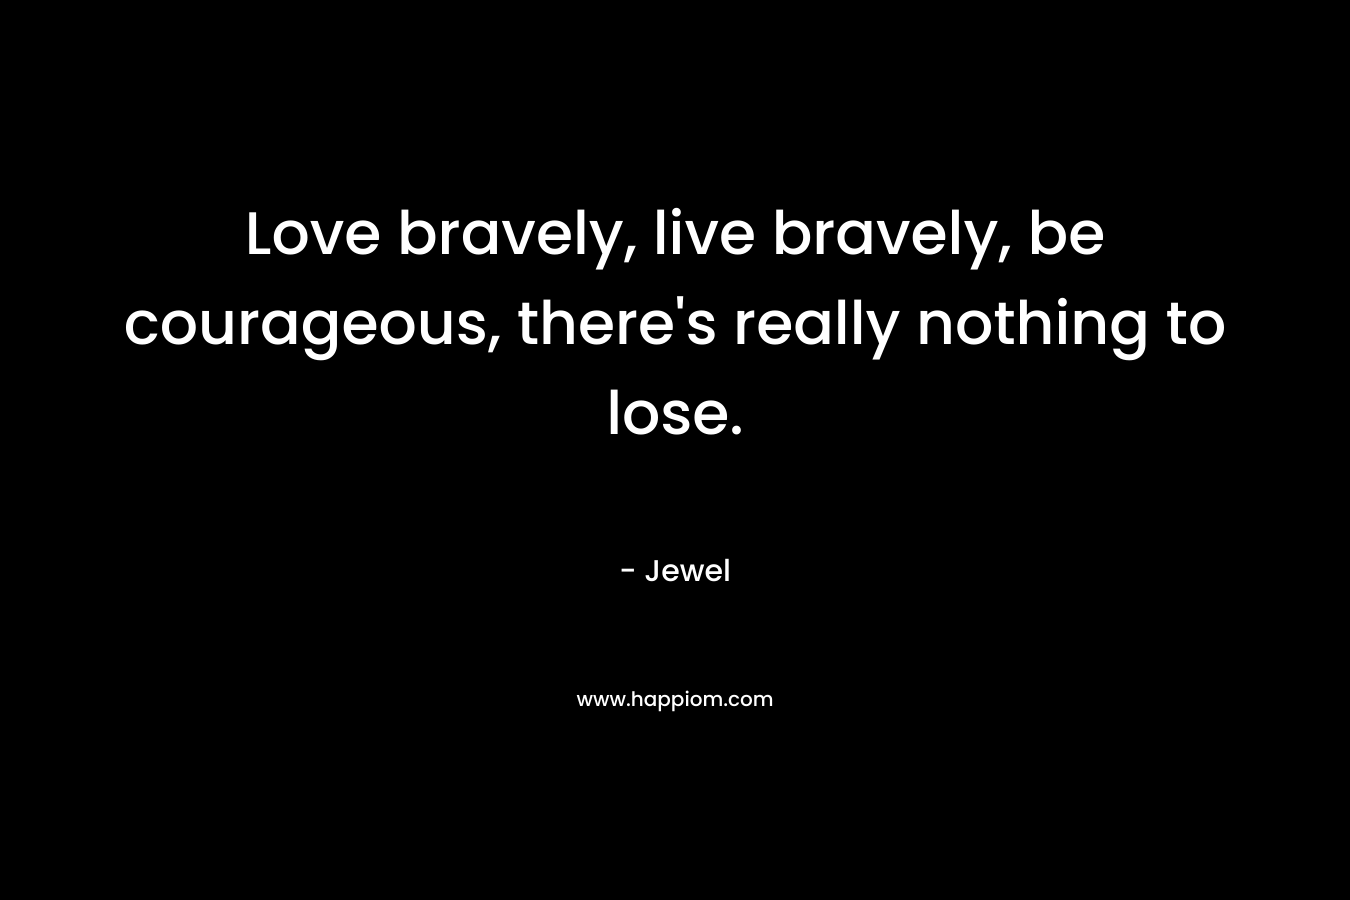 Love bravely, live bravely, be courageous, there’s really nothing to lose. – Jewel